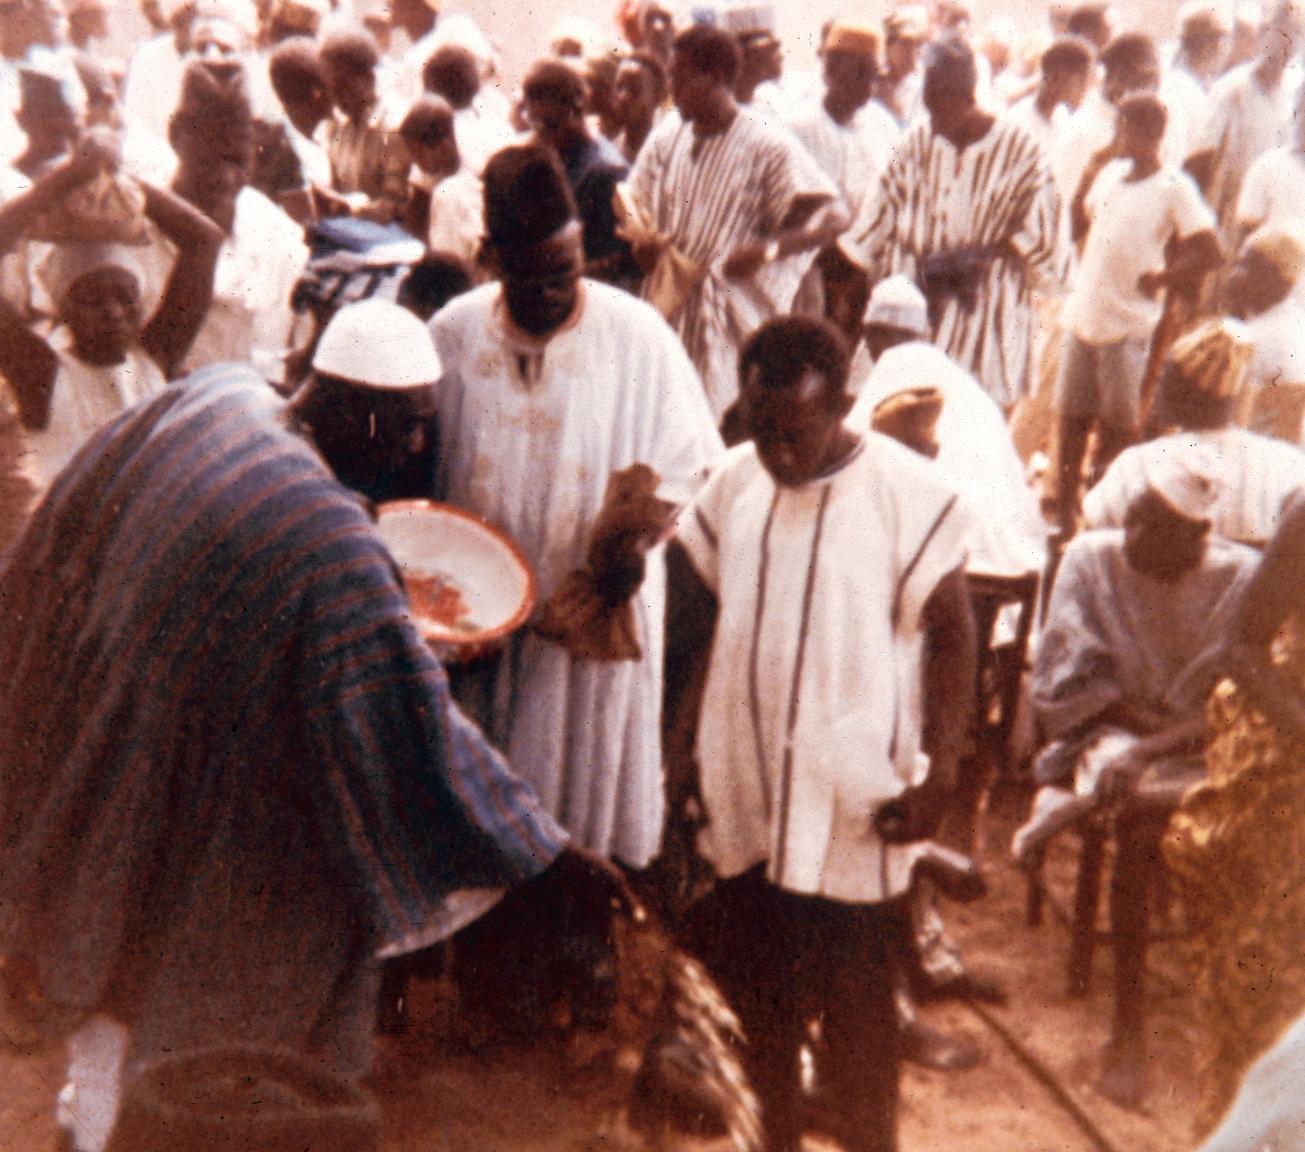 The Final Ceremony at a Sisala Funeral